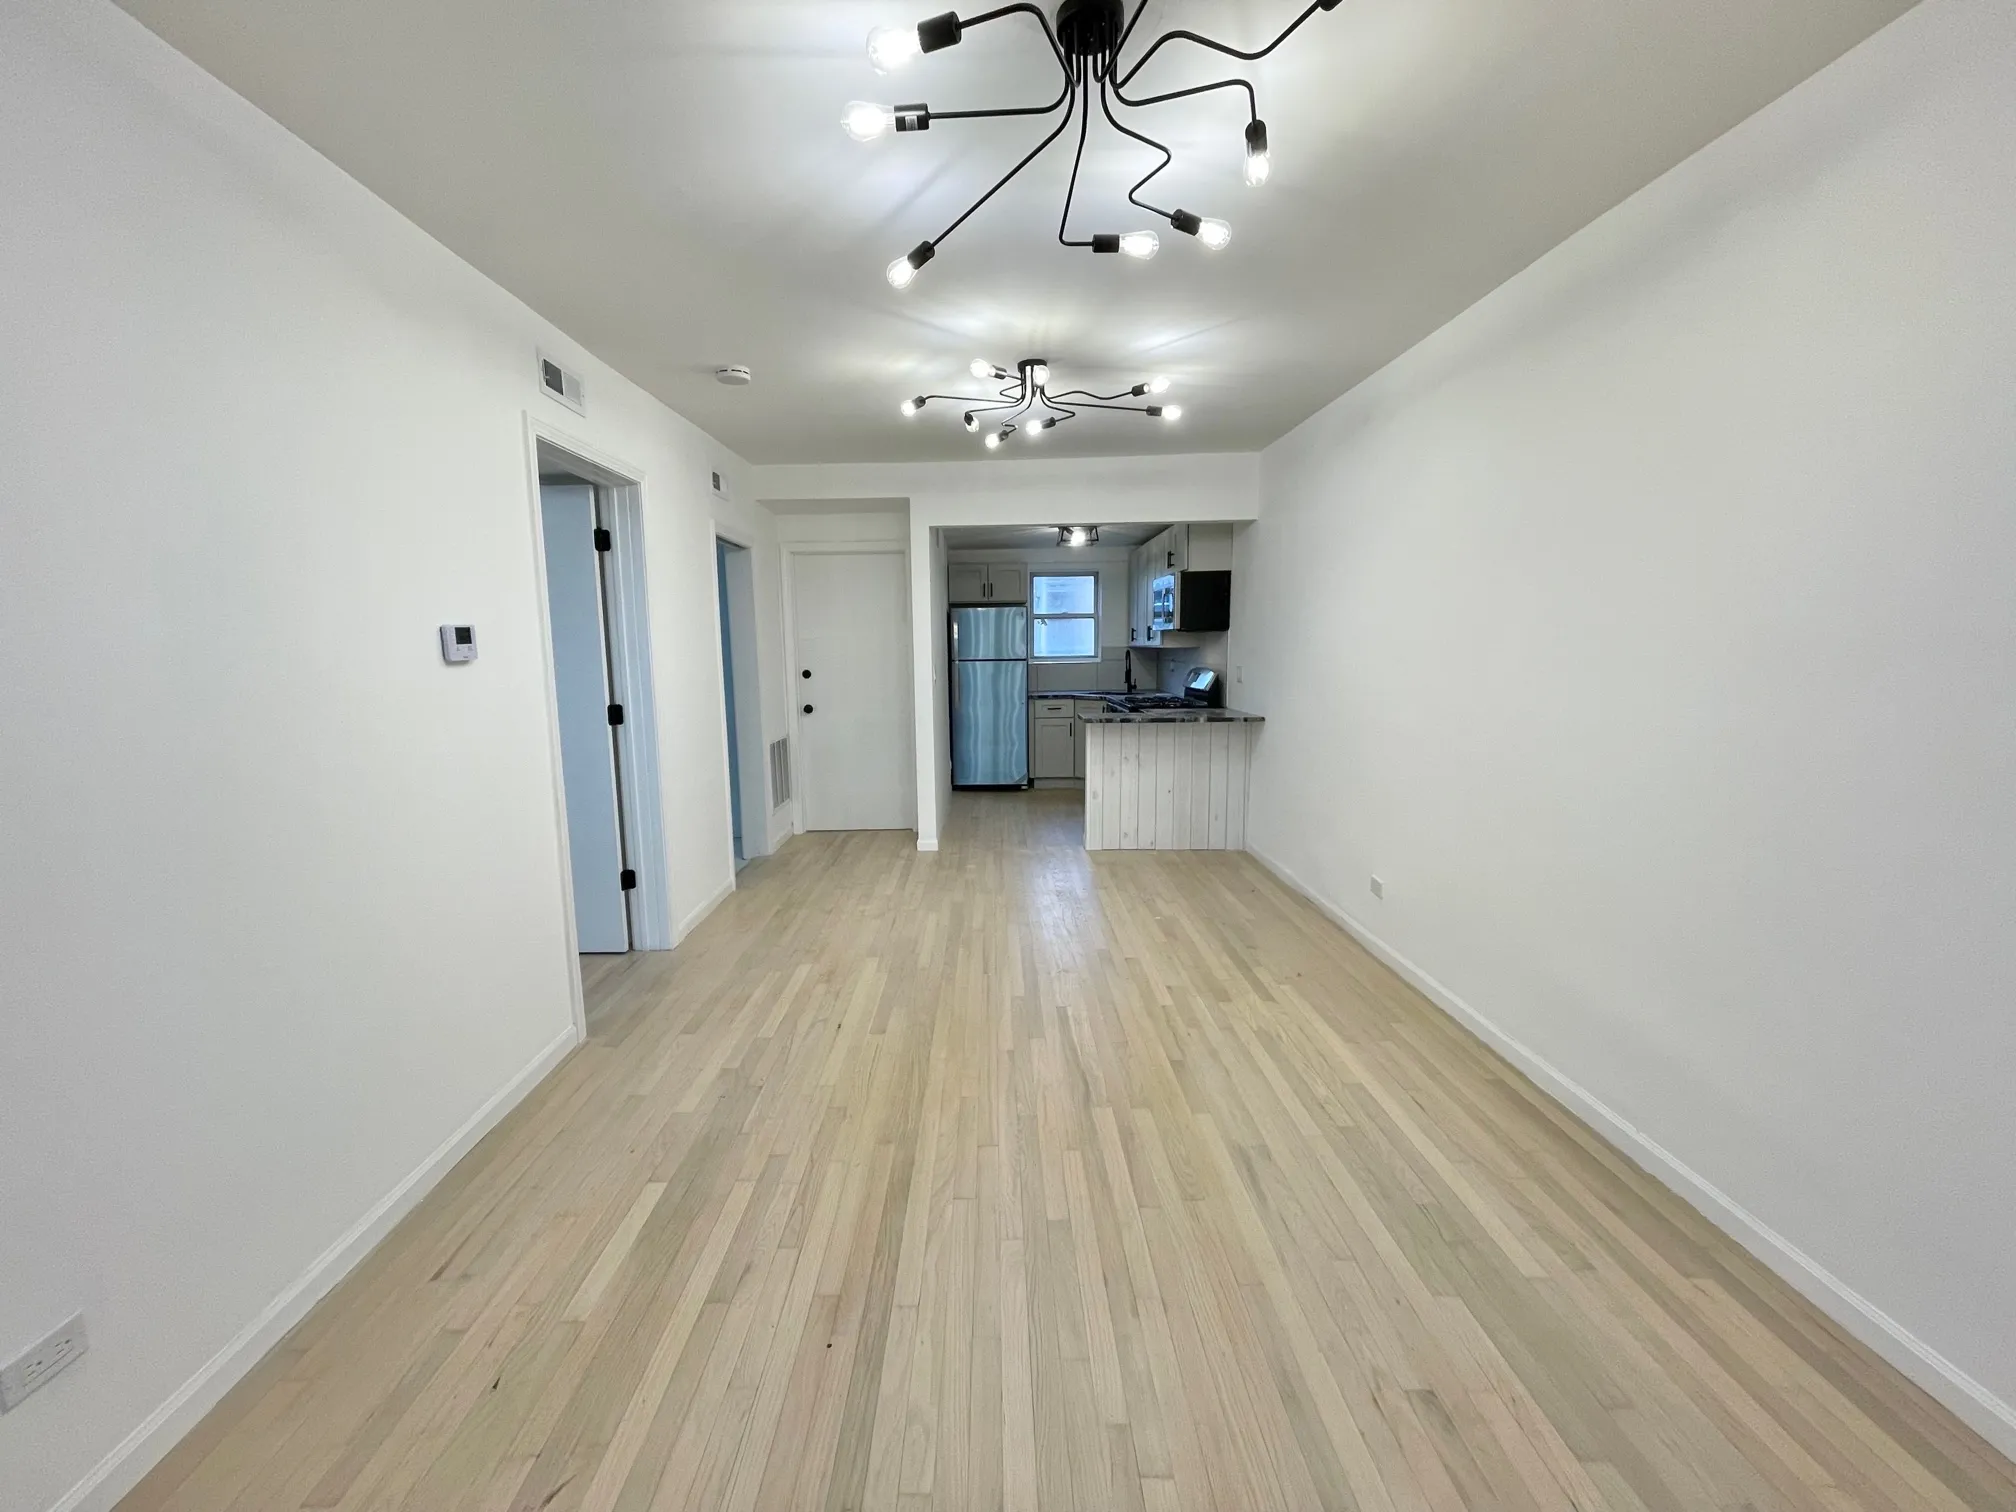 2470 N CLYBOURN AVE 60614-unit#CH001-Chicago-IL